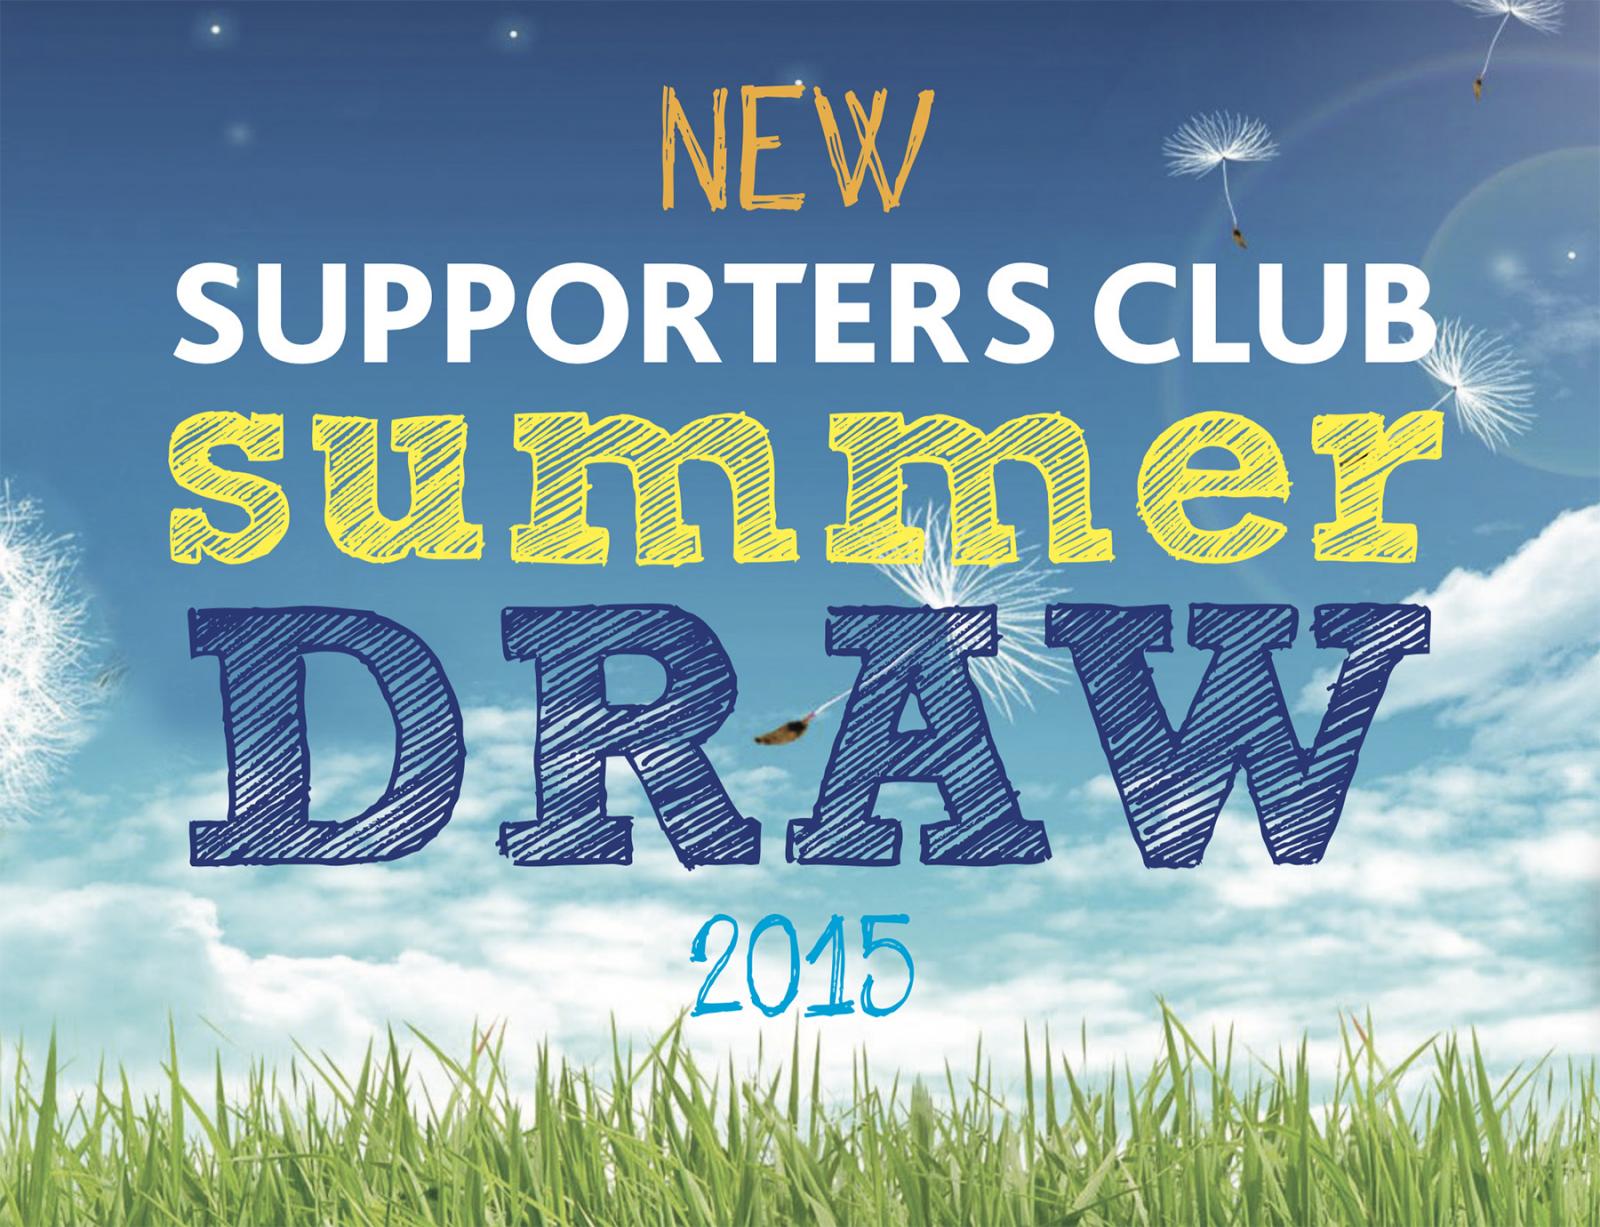 Supporters Club Draw 2015